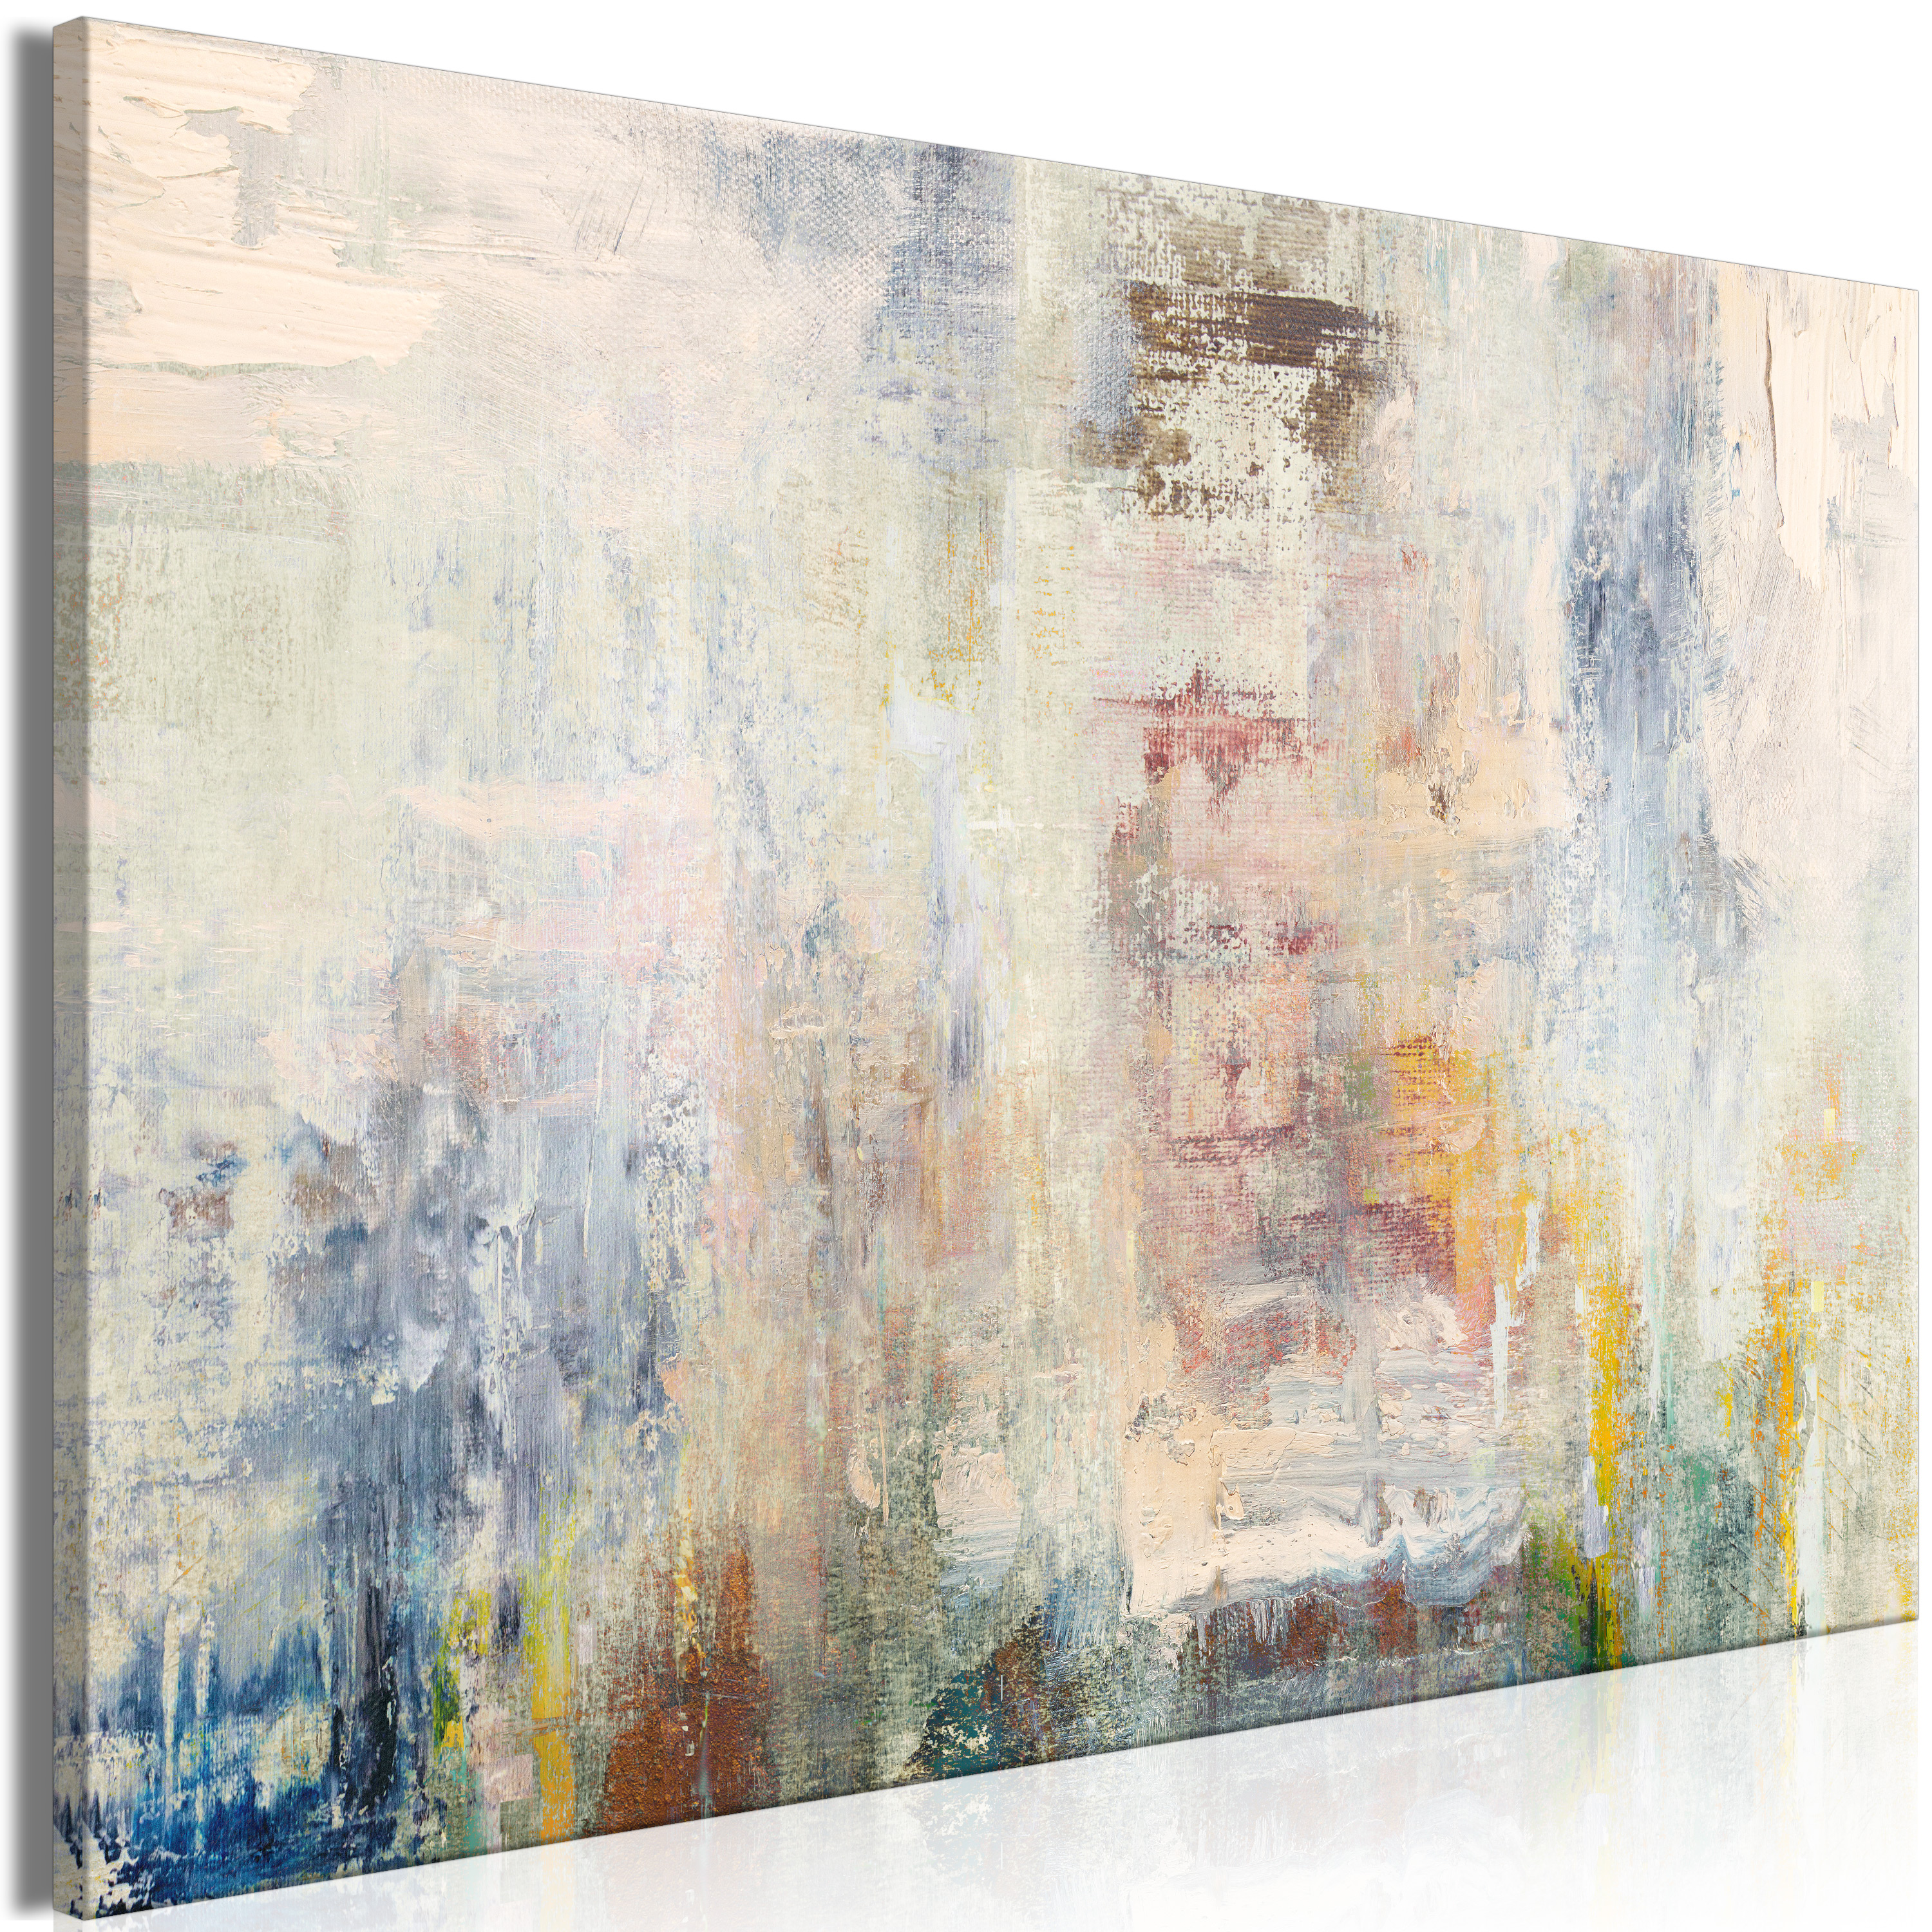 Canvas Print - Nebula of Thoughts (1 Part) Wide - 90x60